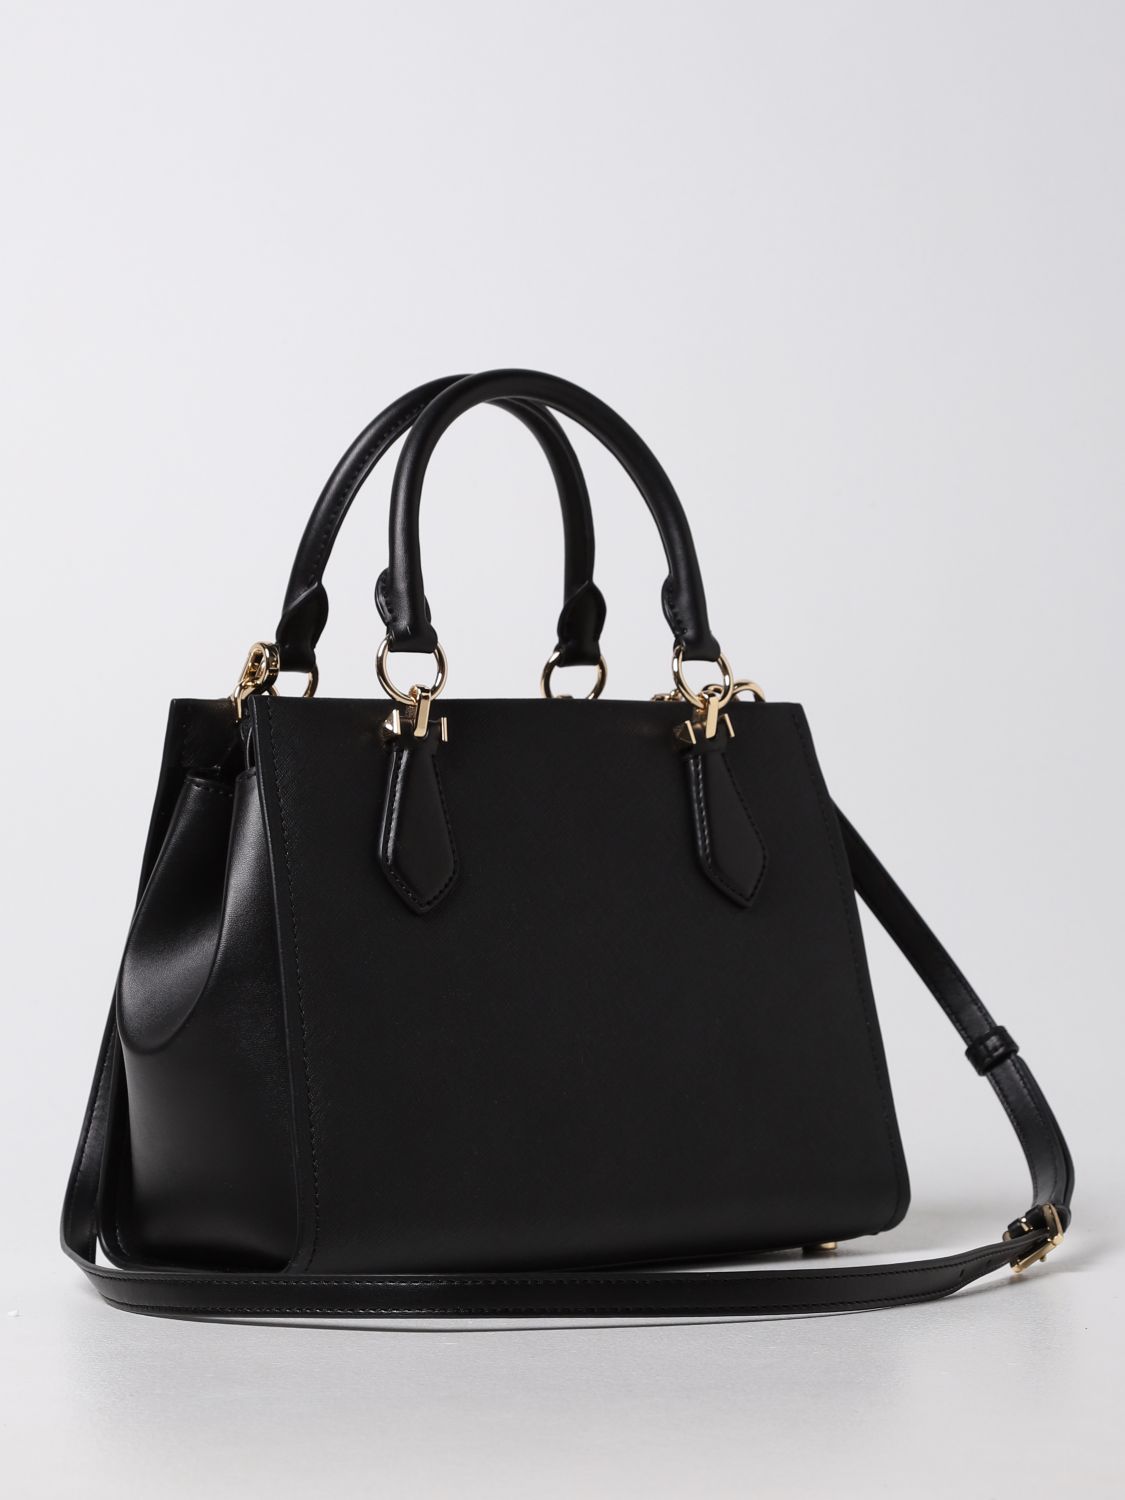 You can get a Michael Kors black purse for only 110 at Walmart